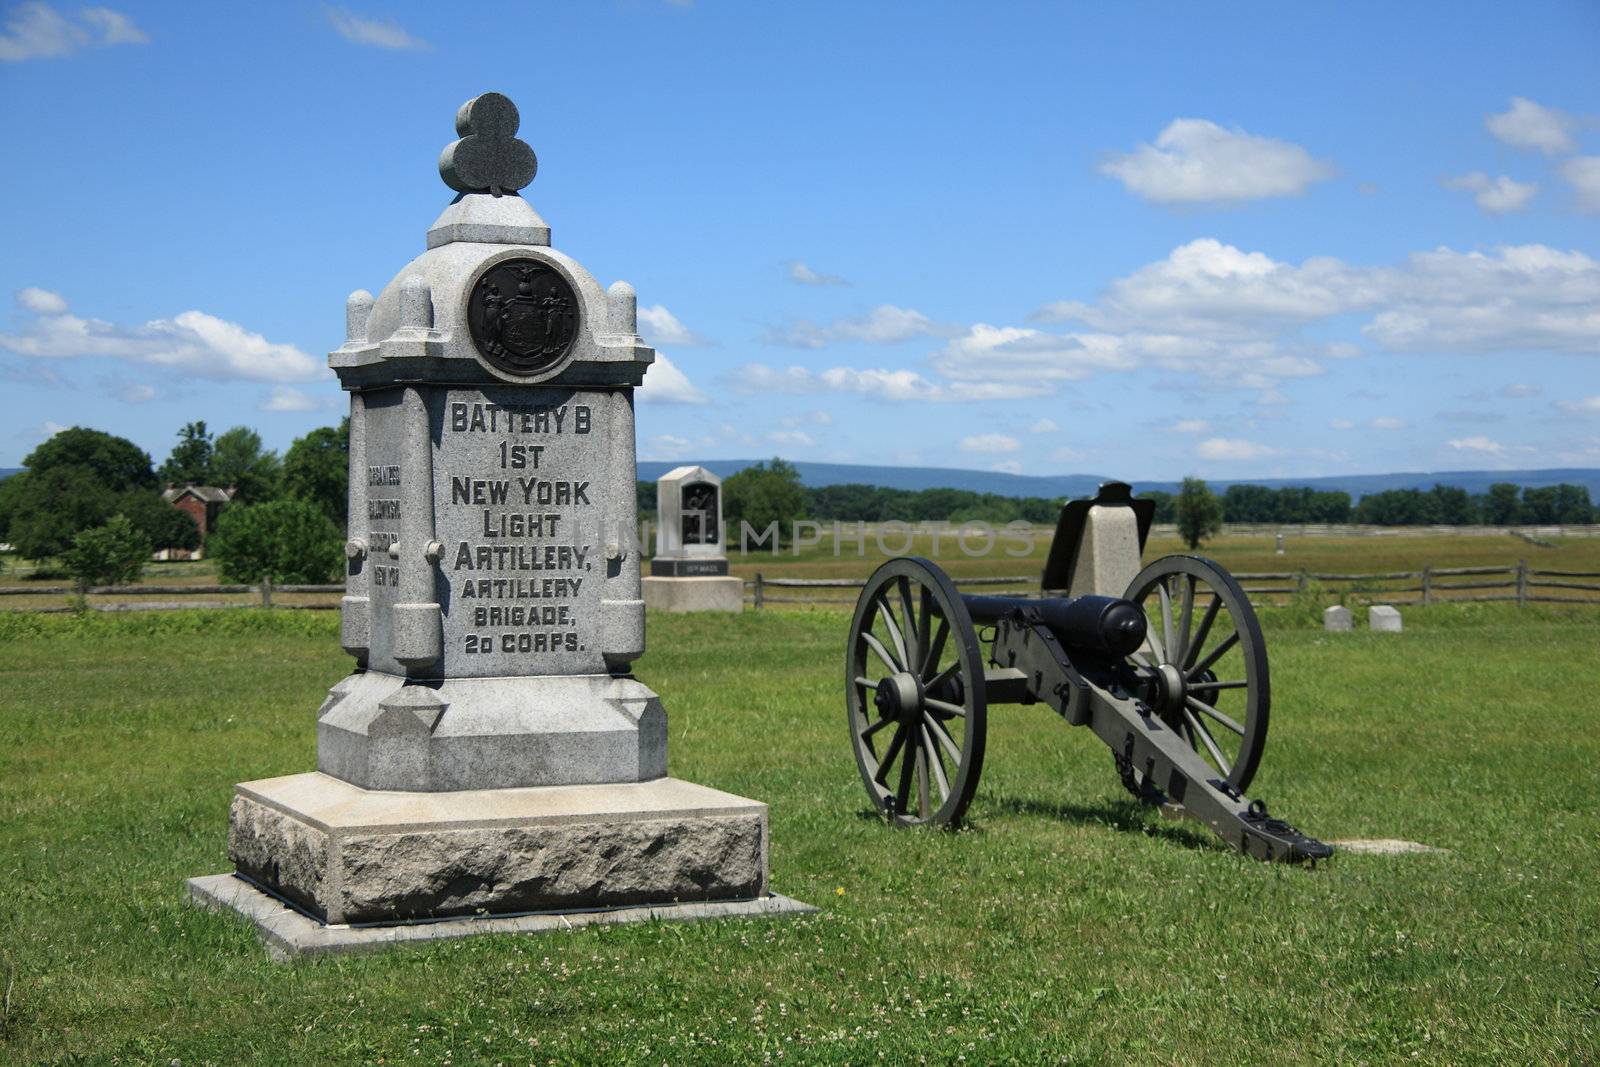 New York monument and cannon on Cemetery Ridge overlook battle site at Gettysburg National Military Park